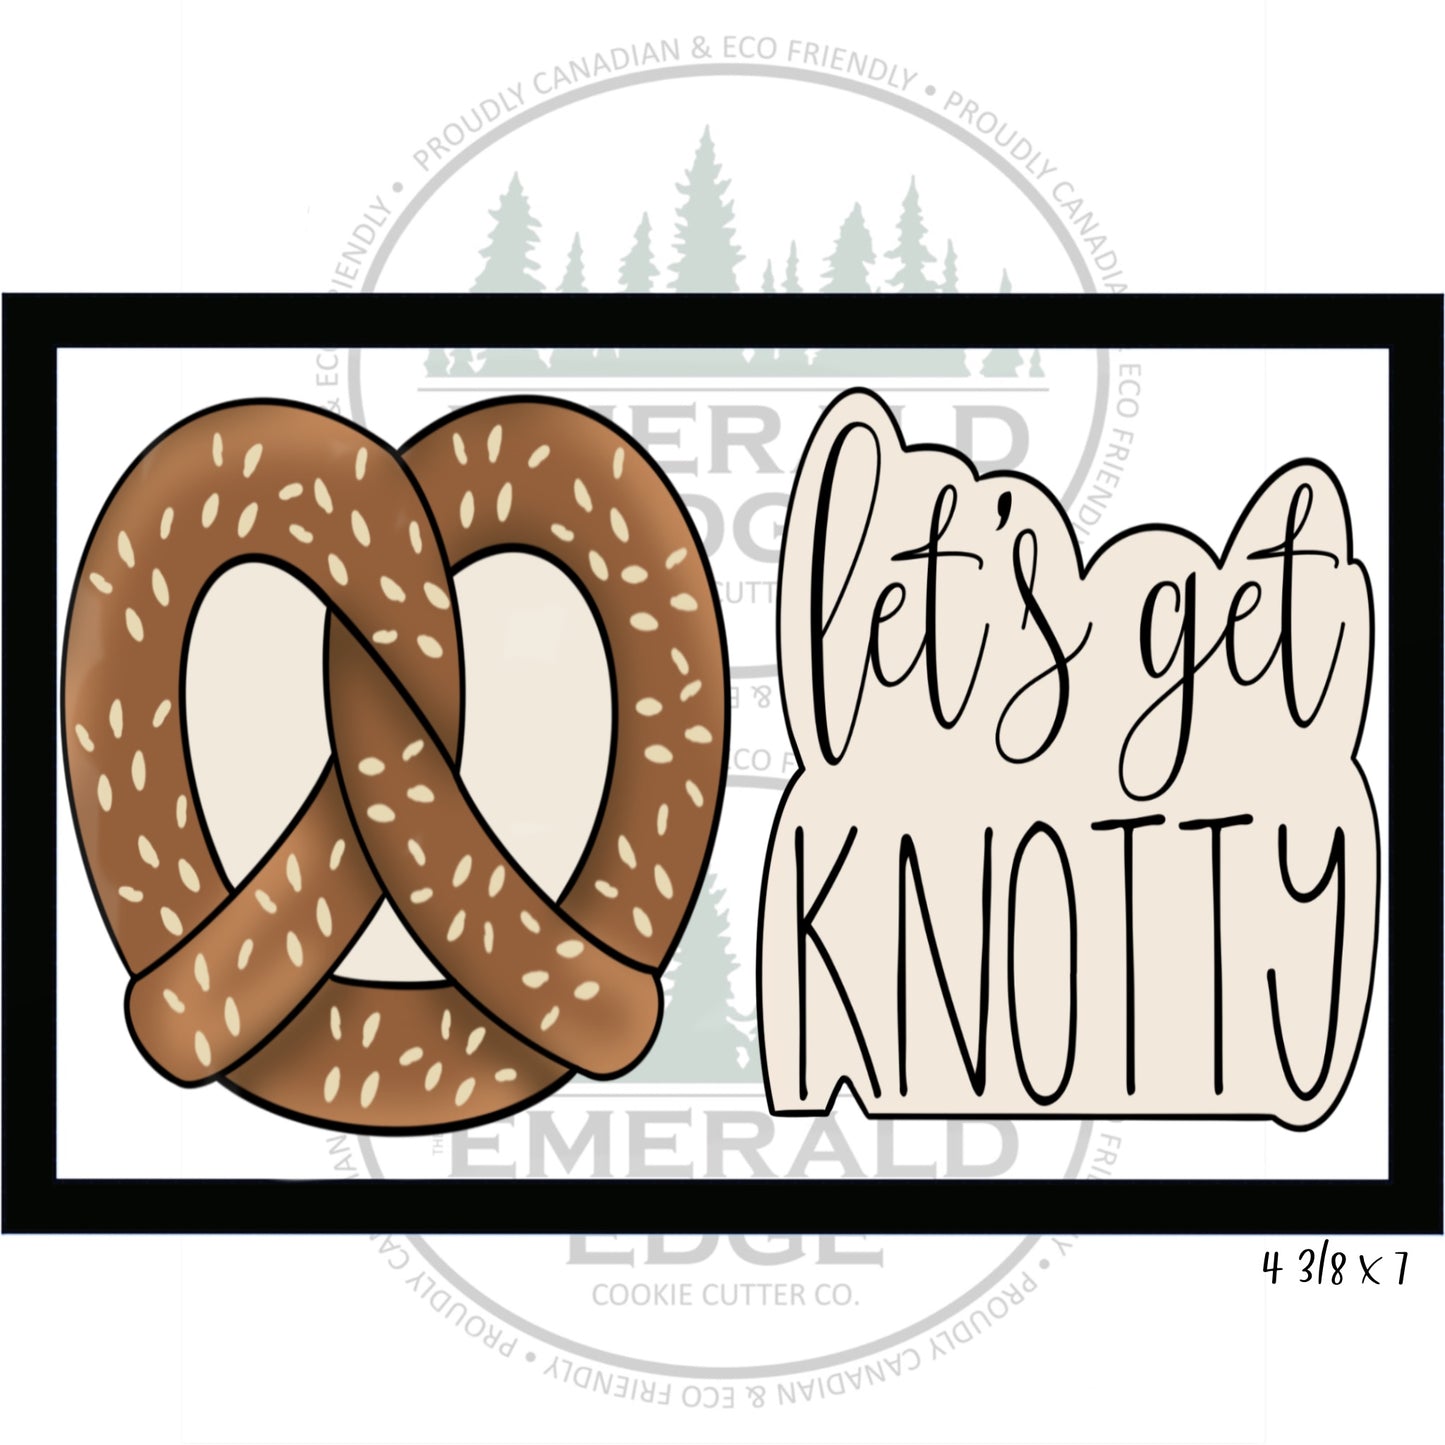 Let’s Get Knotty